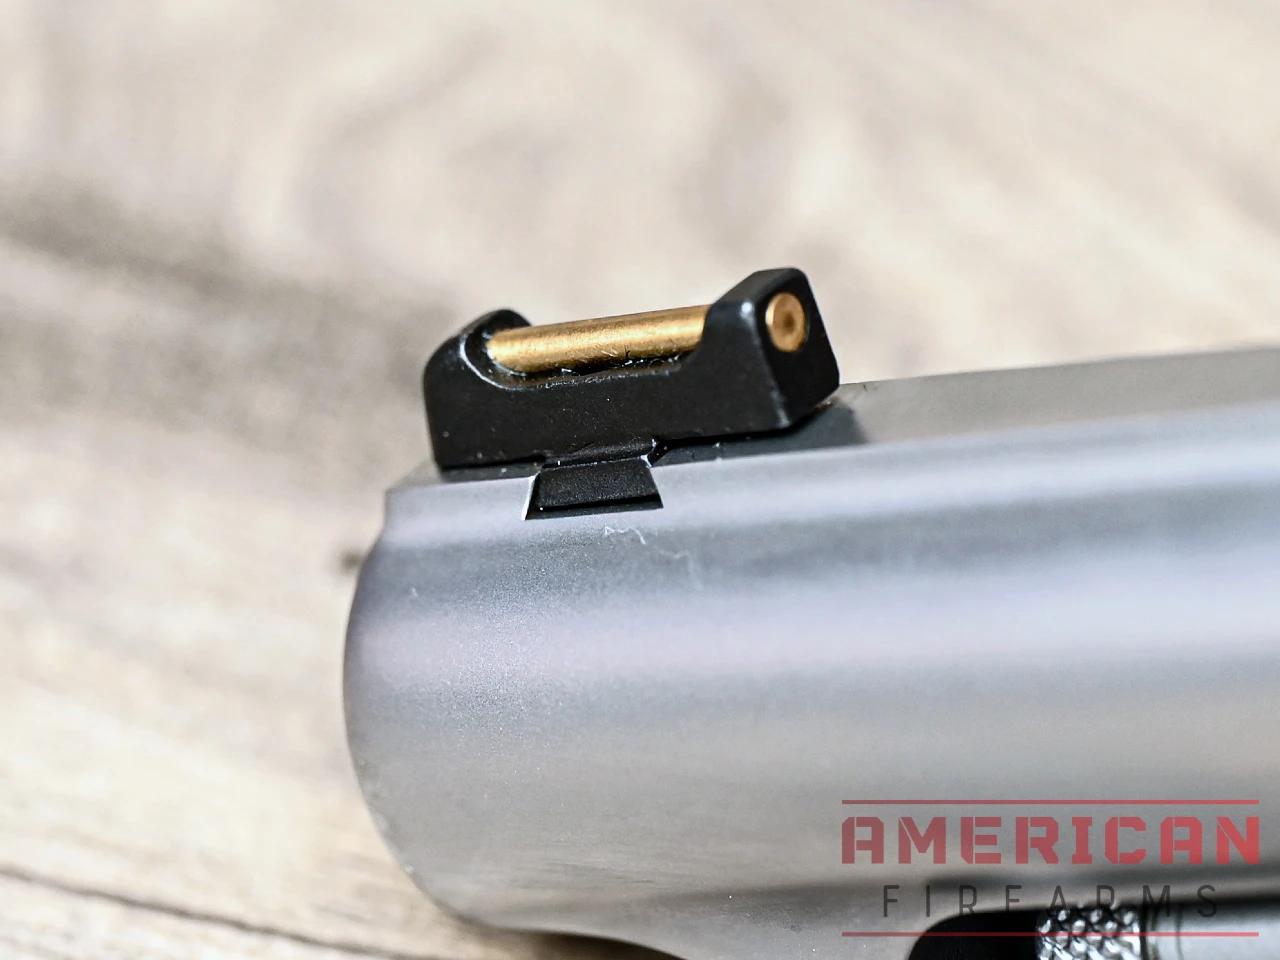 The brass rod front sight is such a nice touch.